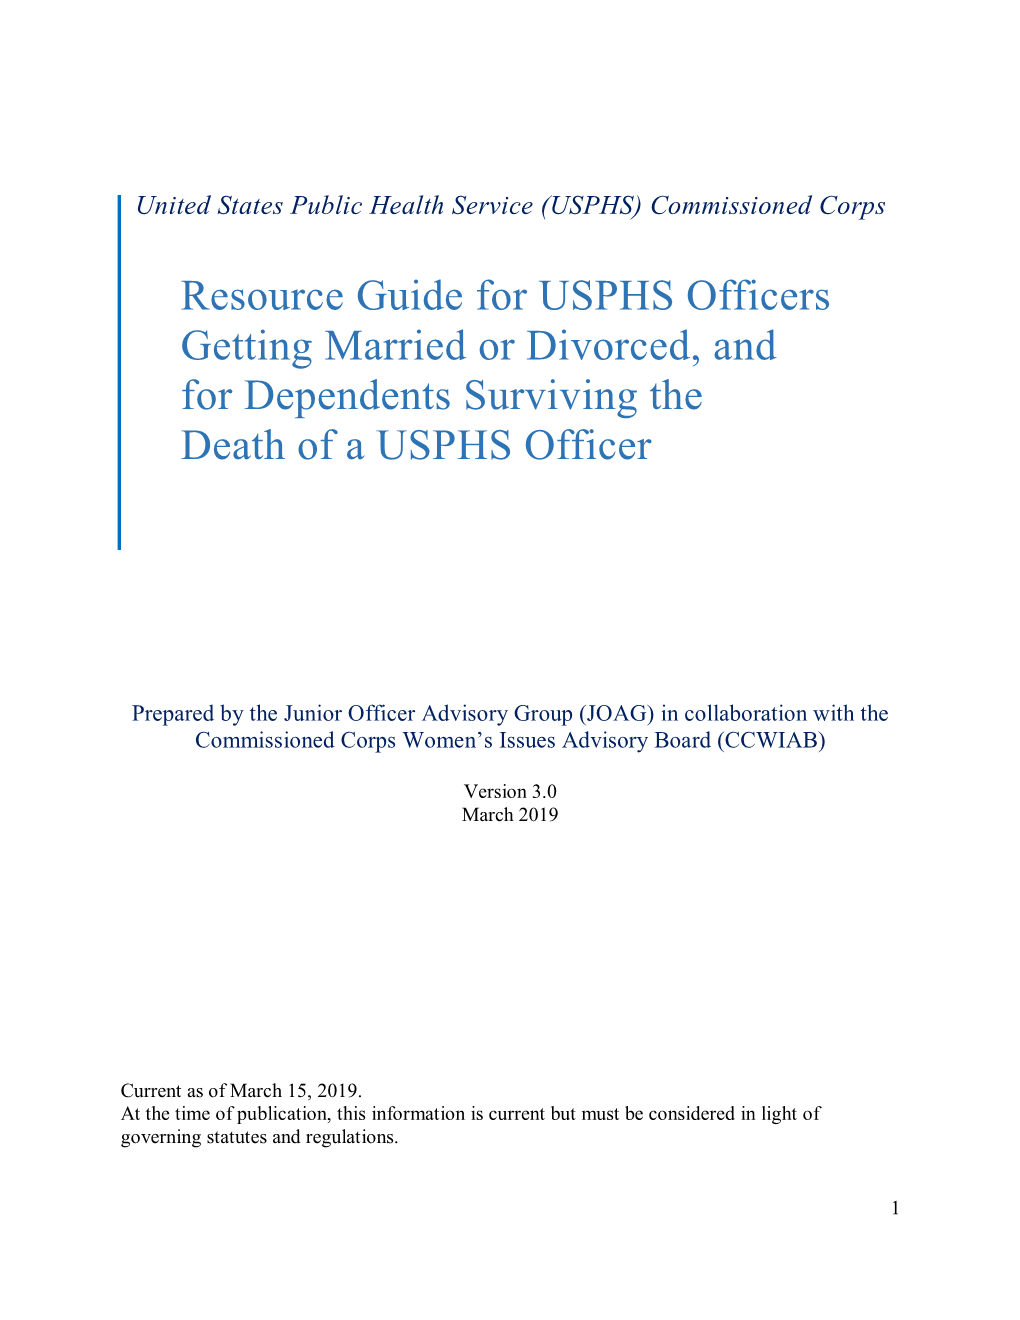 Resource Guide for USPHS Officers Getting Married Or Getting